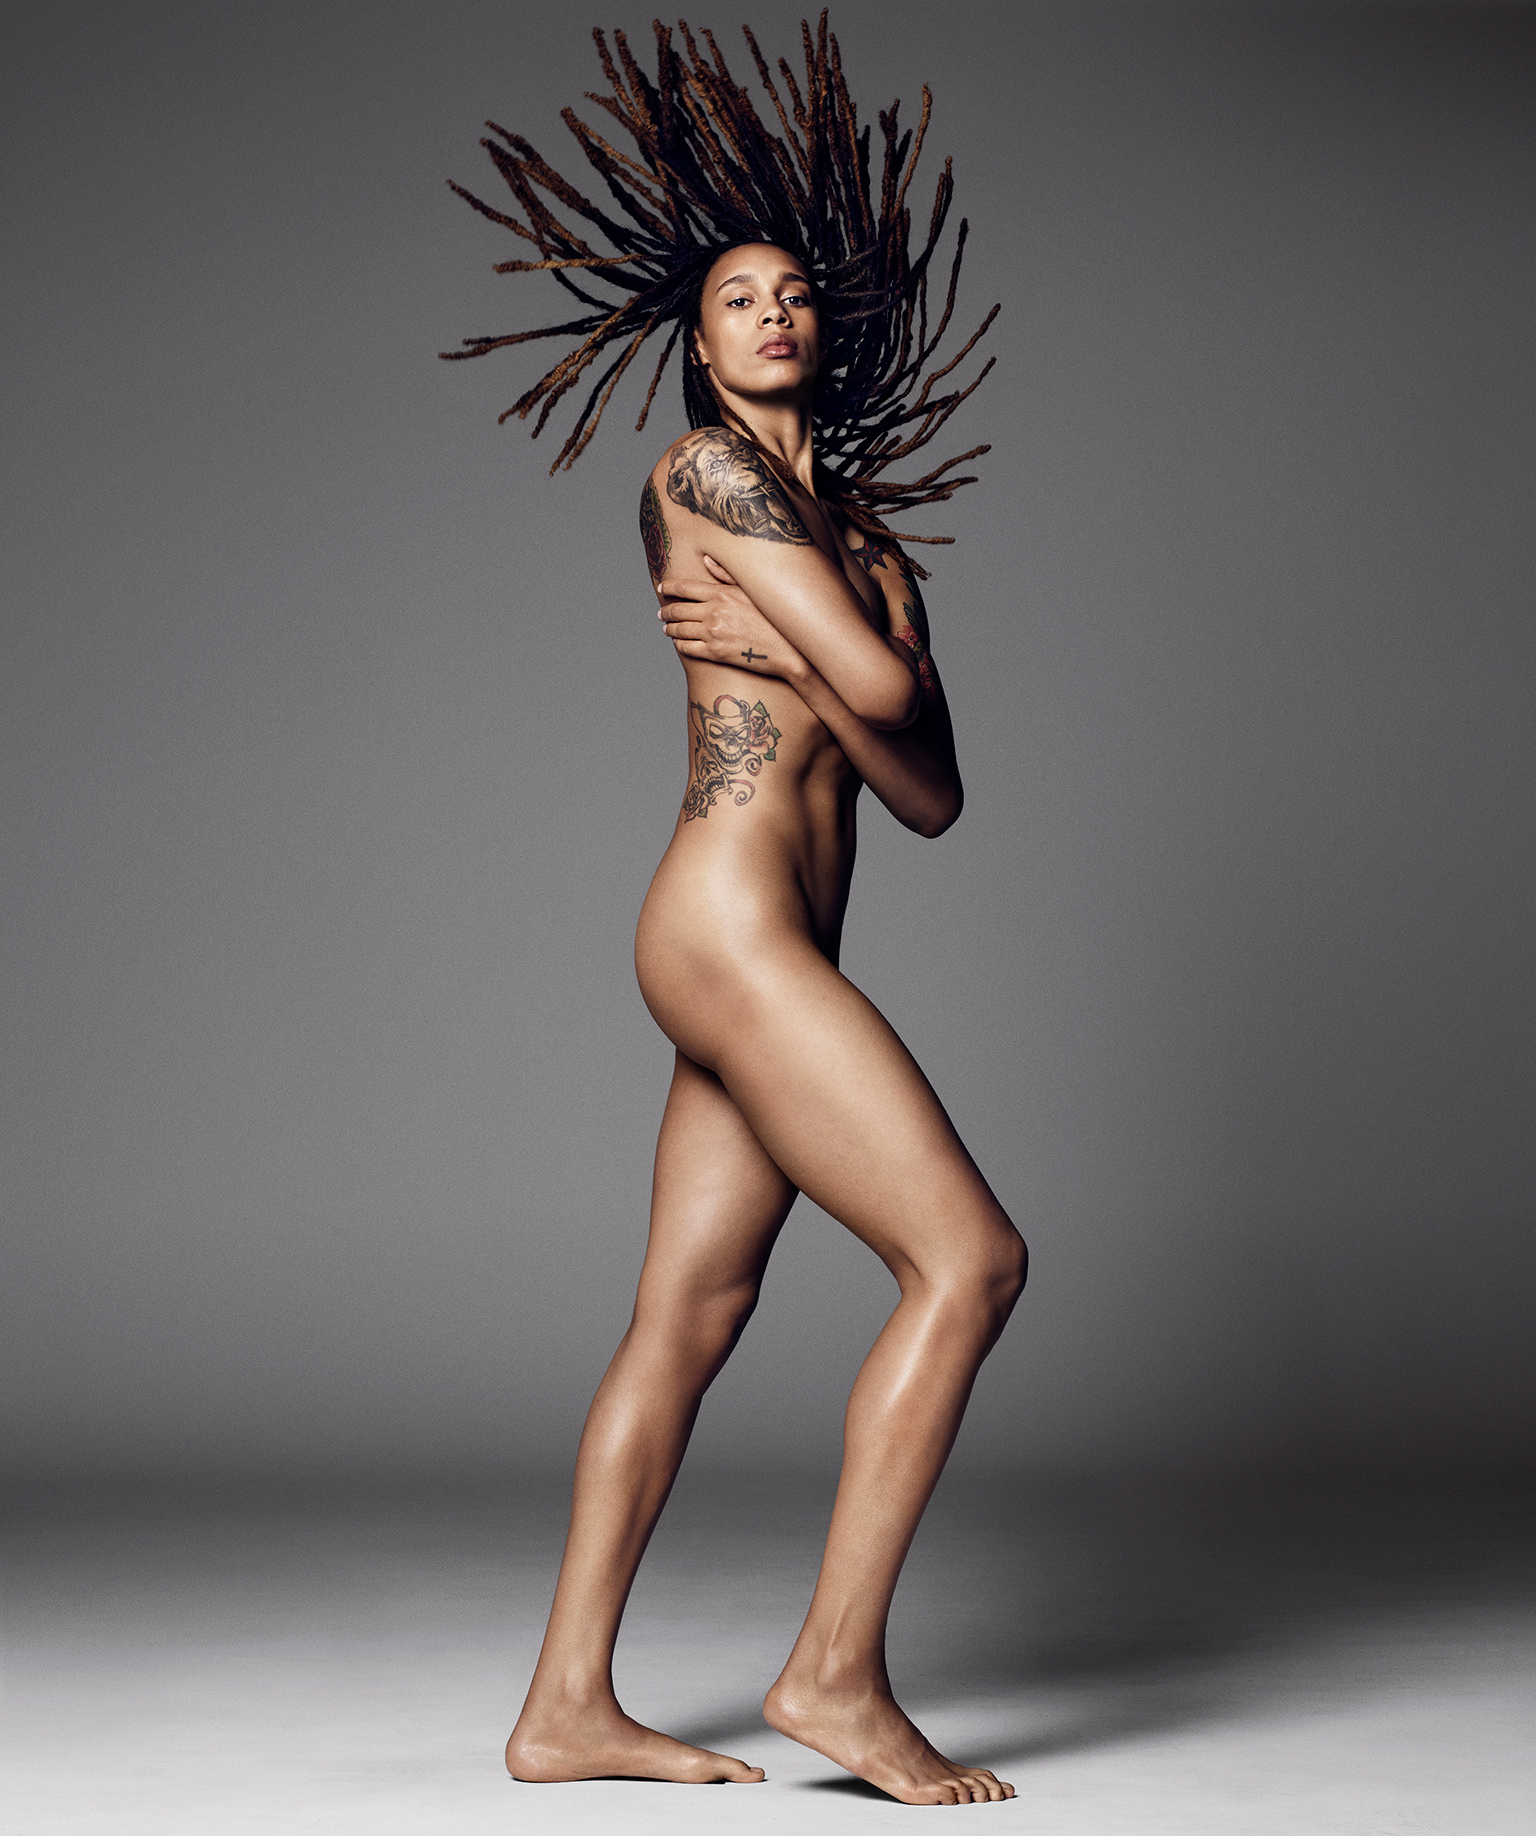 Brittany griner nude